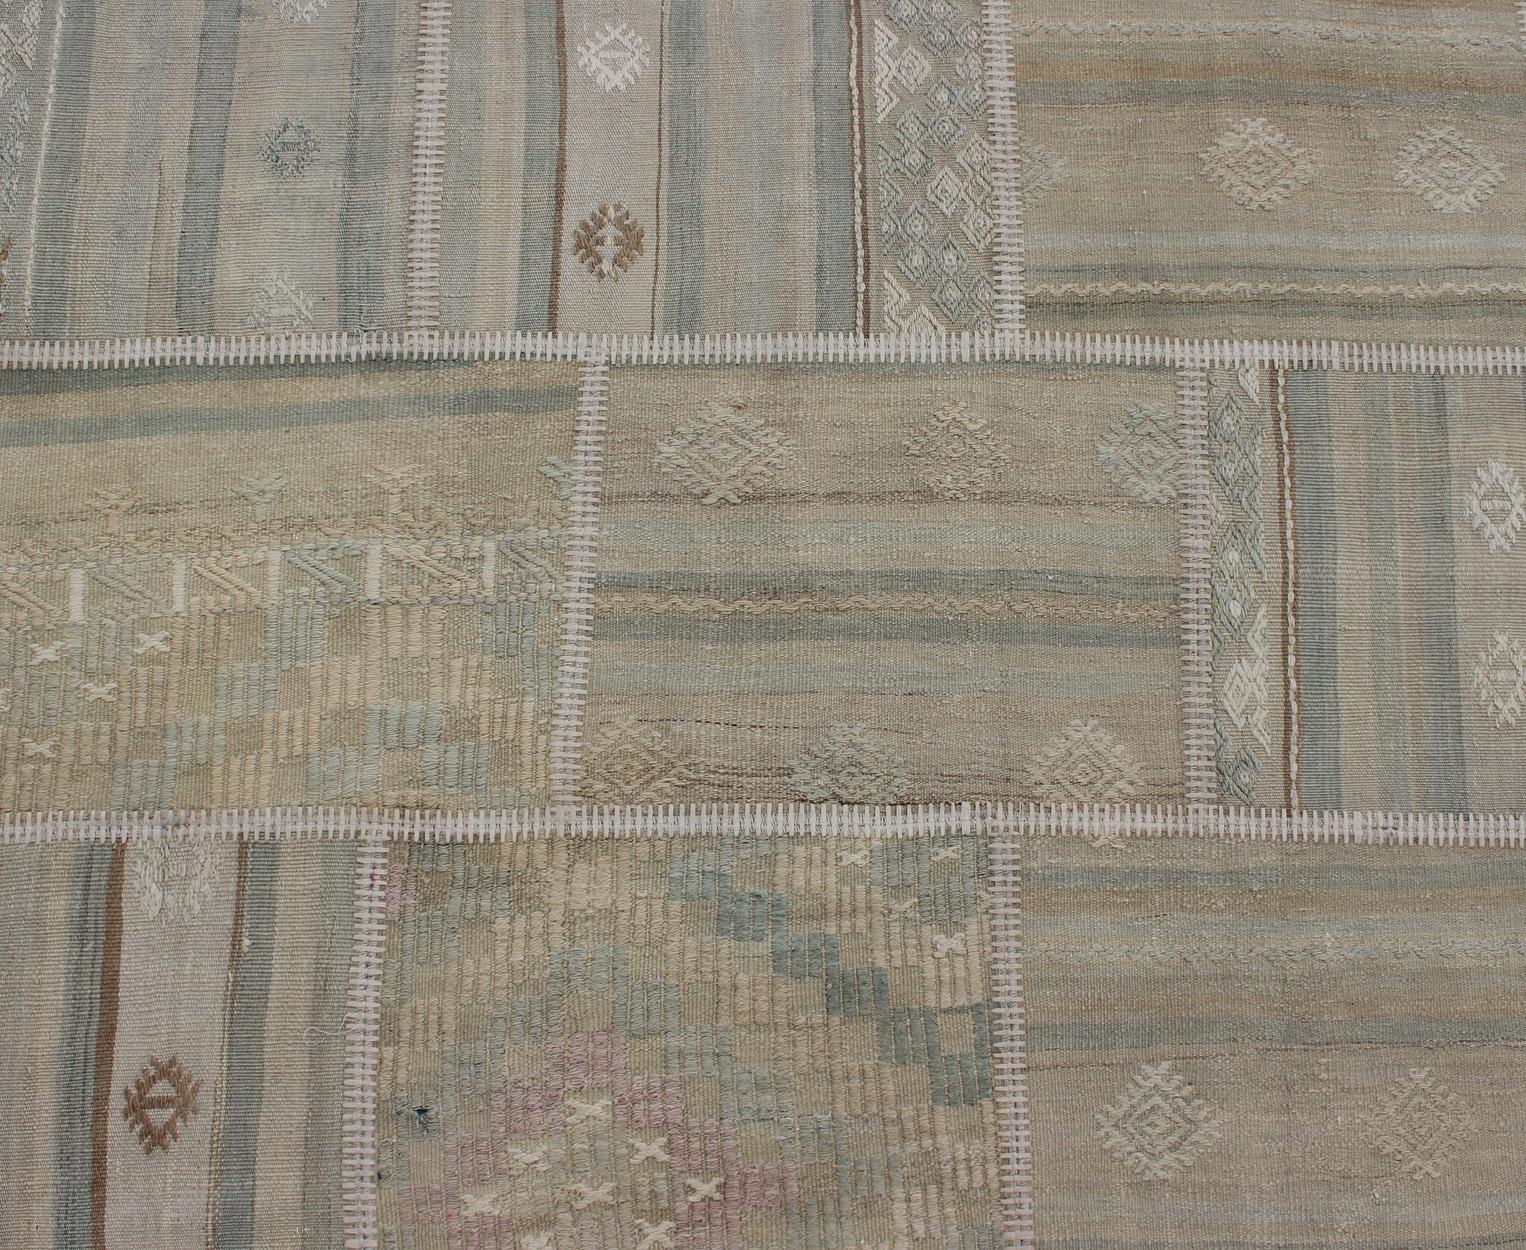 Large Turkish Kilim in Tan, Blue, Taupe, Light Green & Neutral Colors For Sale 1